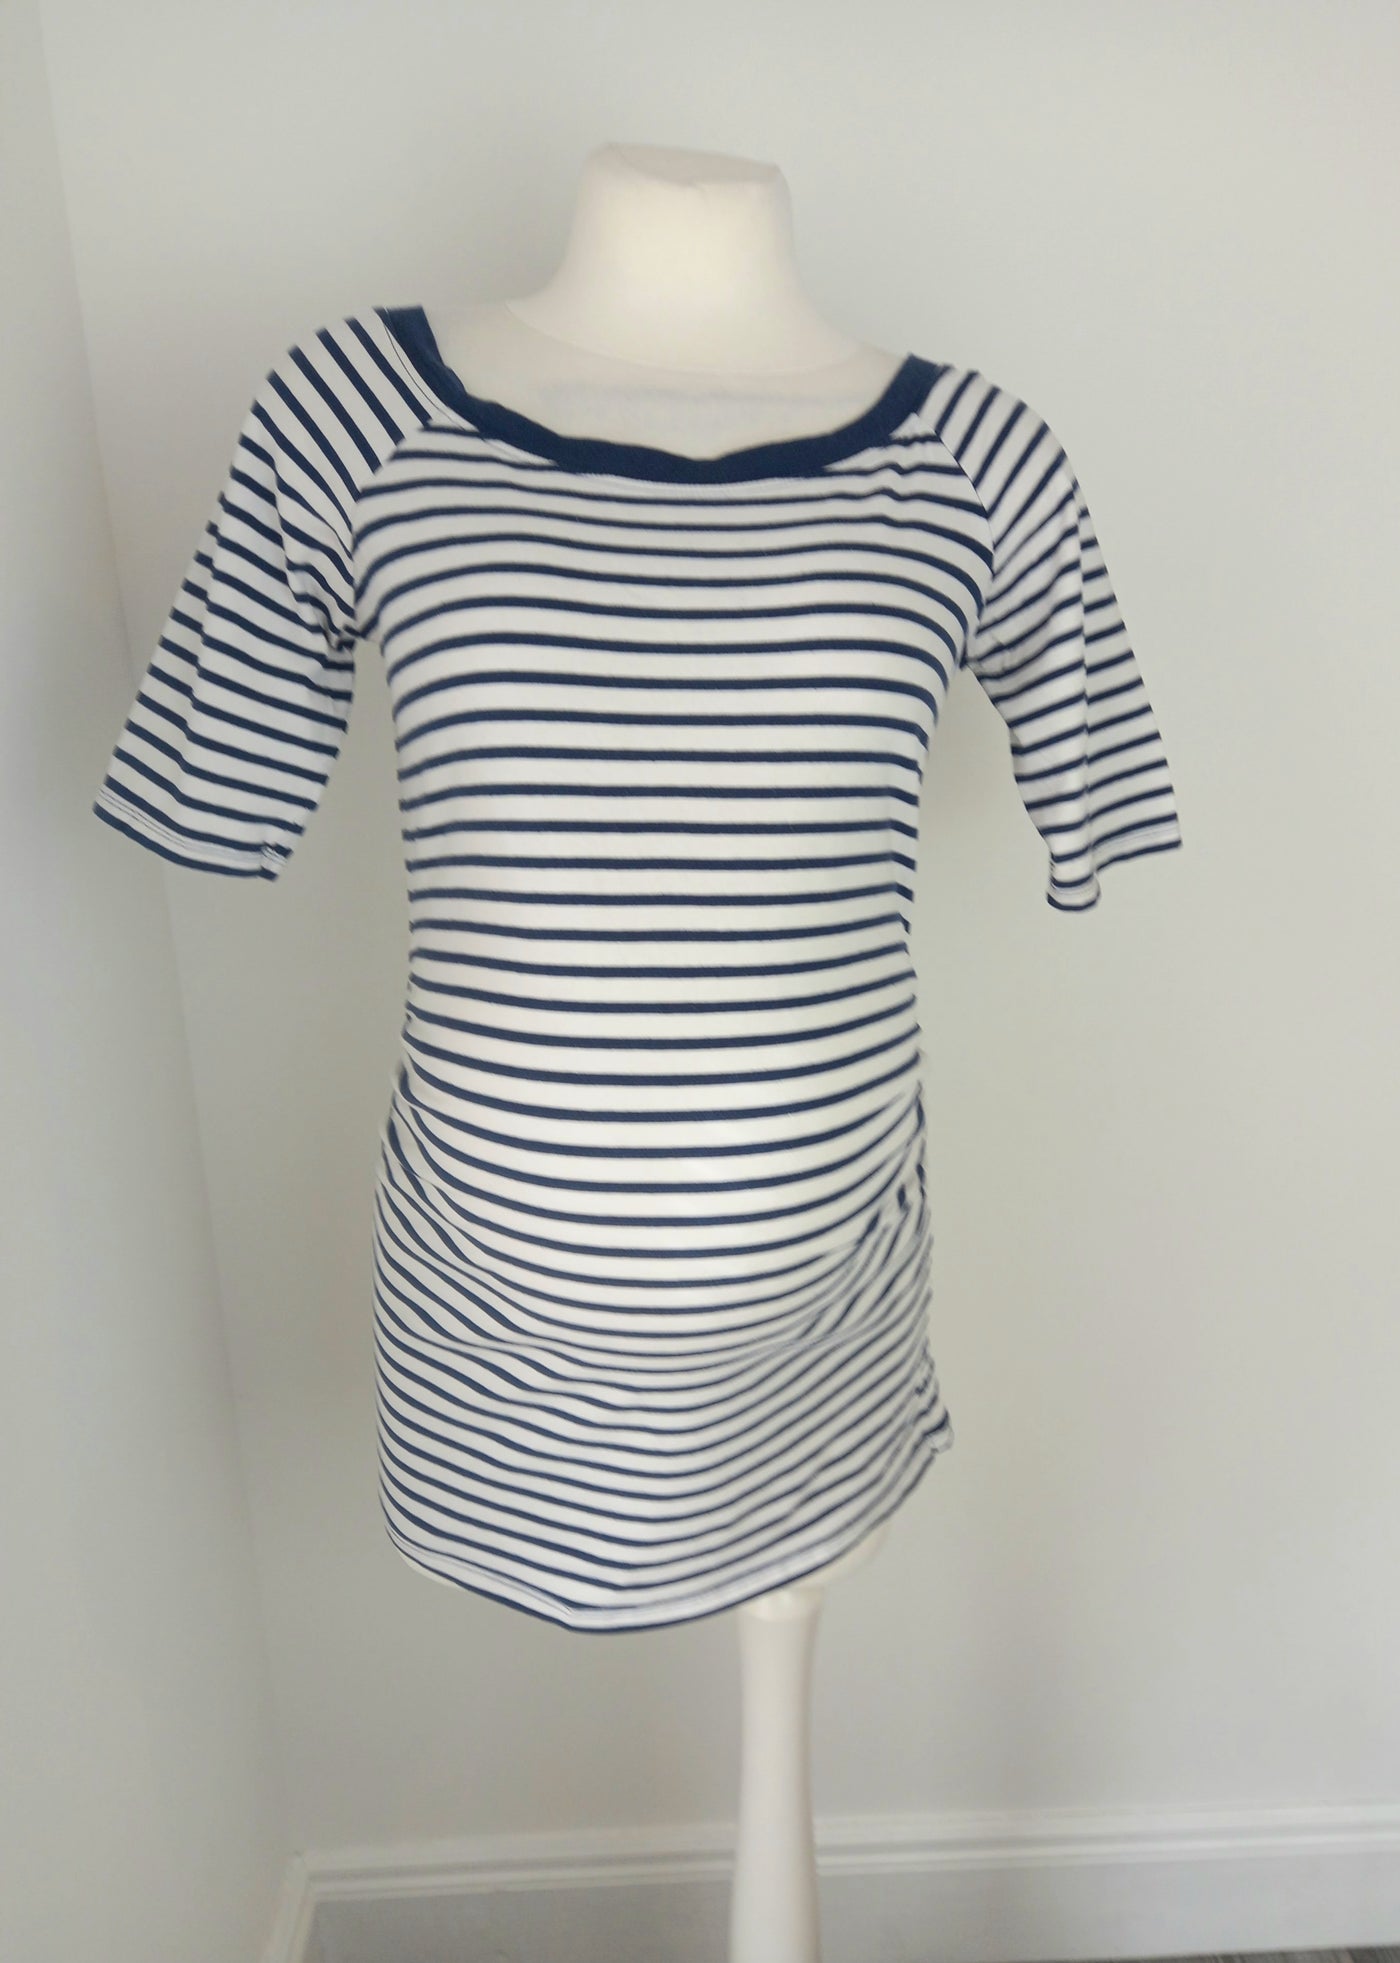 New Look Maternity white & navy striped short sleeve top - Size 12